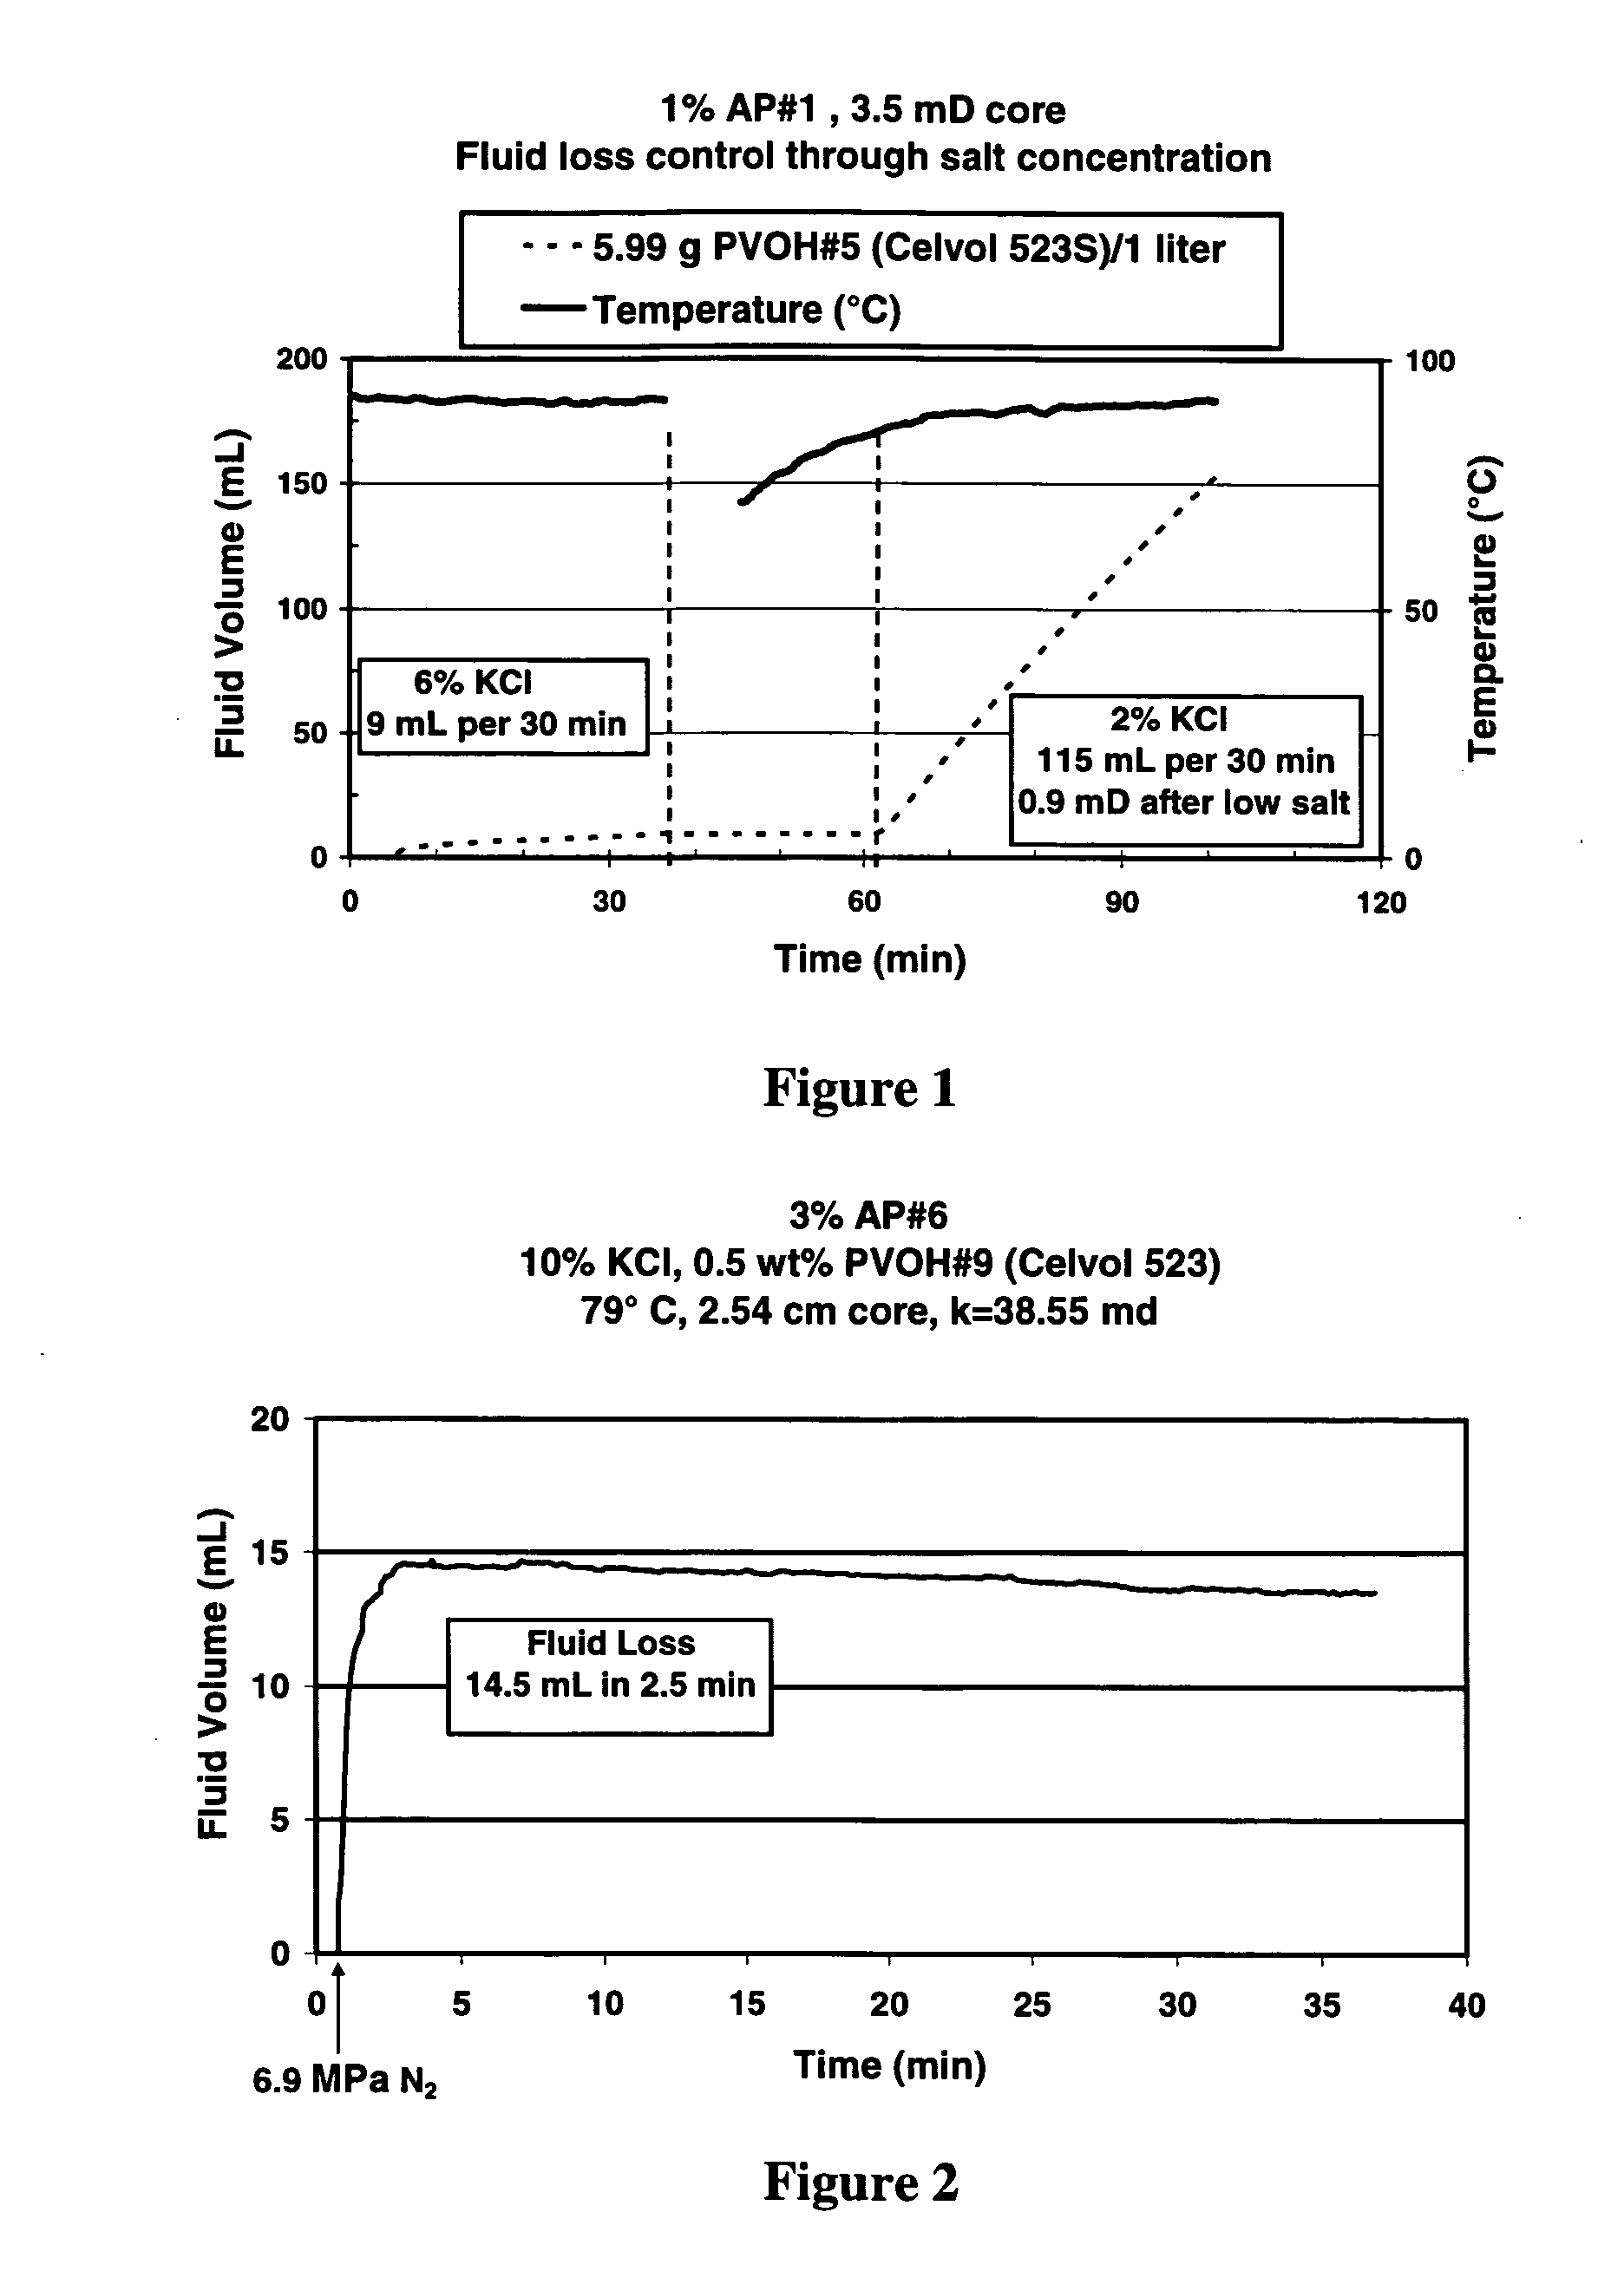 Well treatment with dissolvable polymer